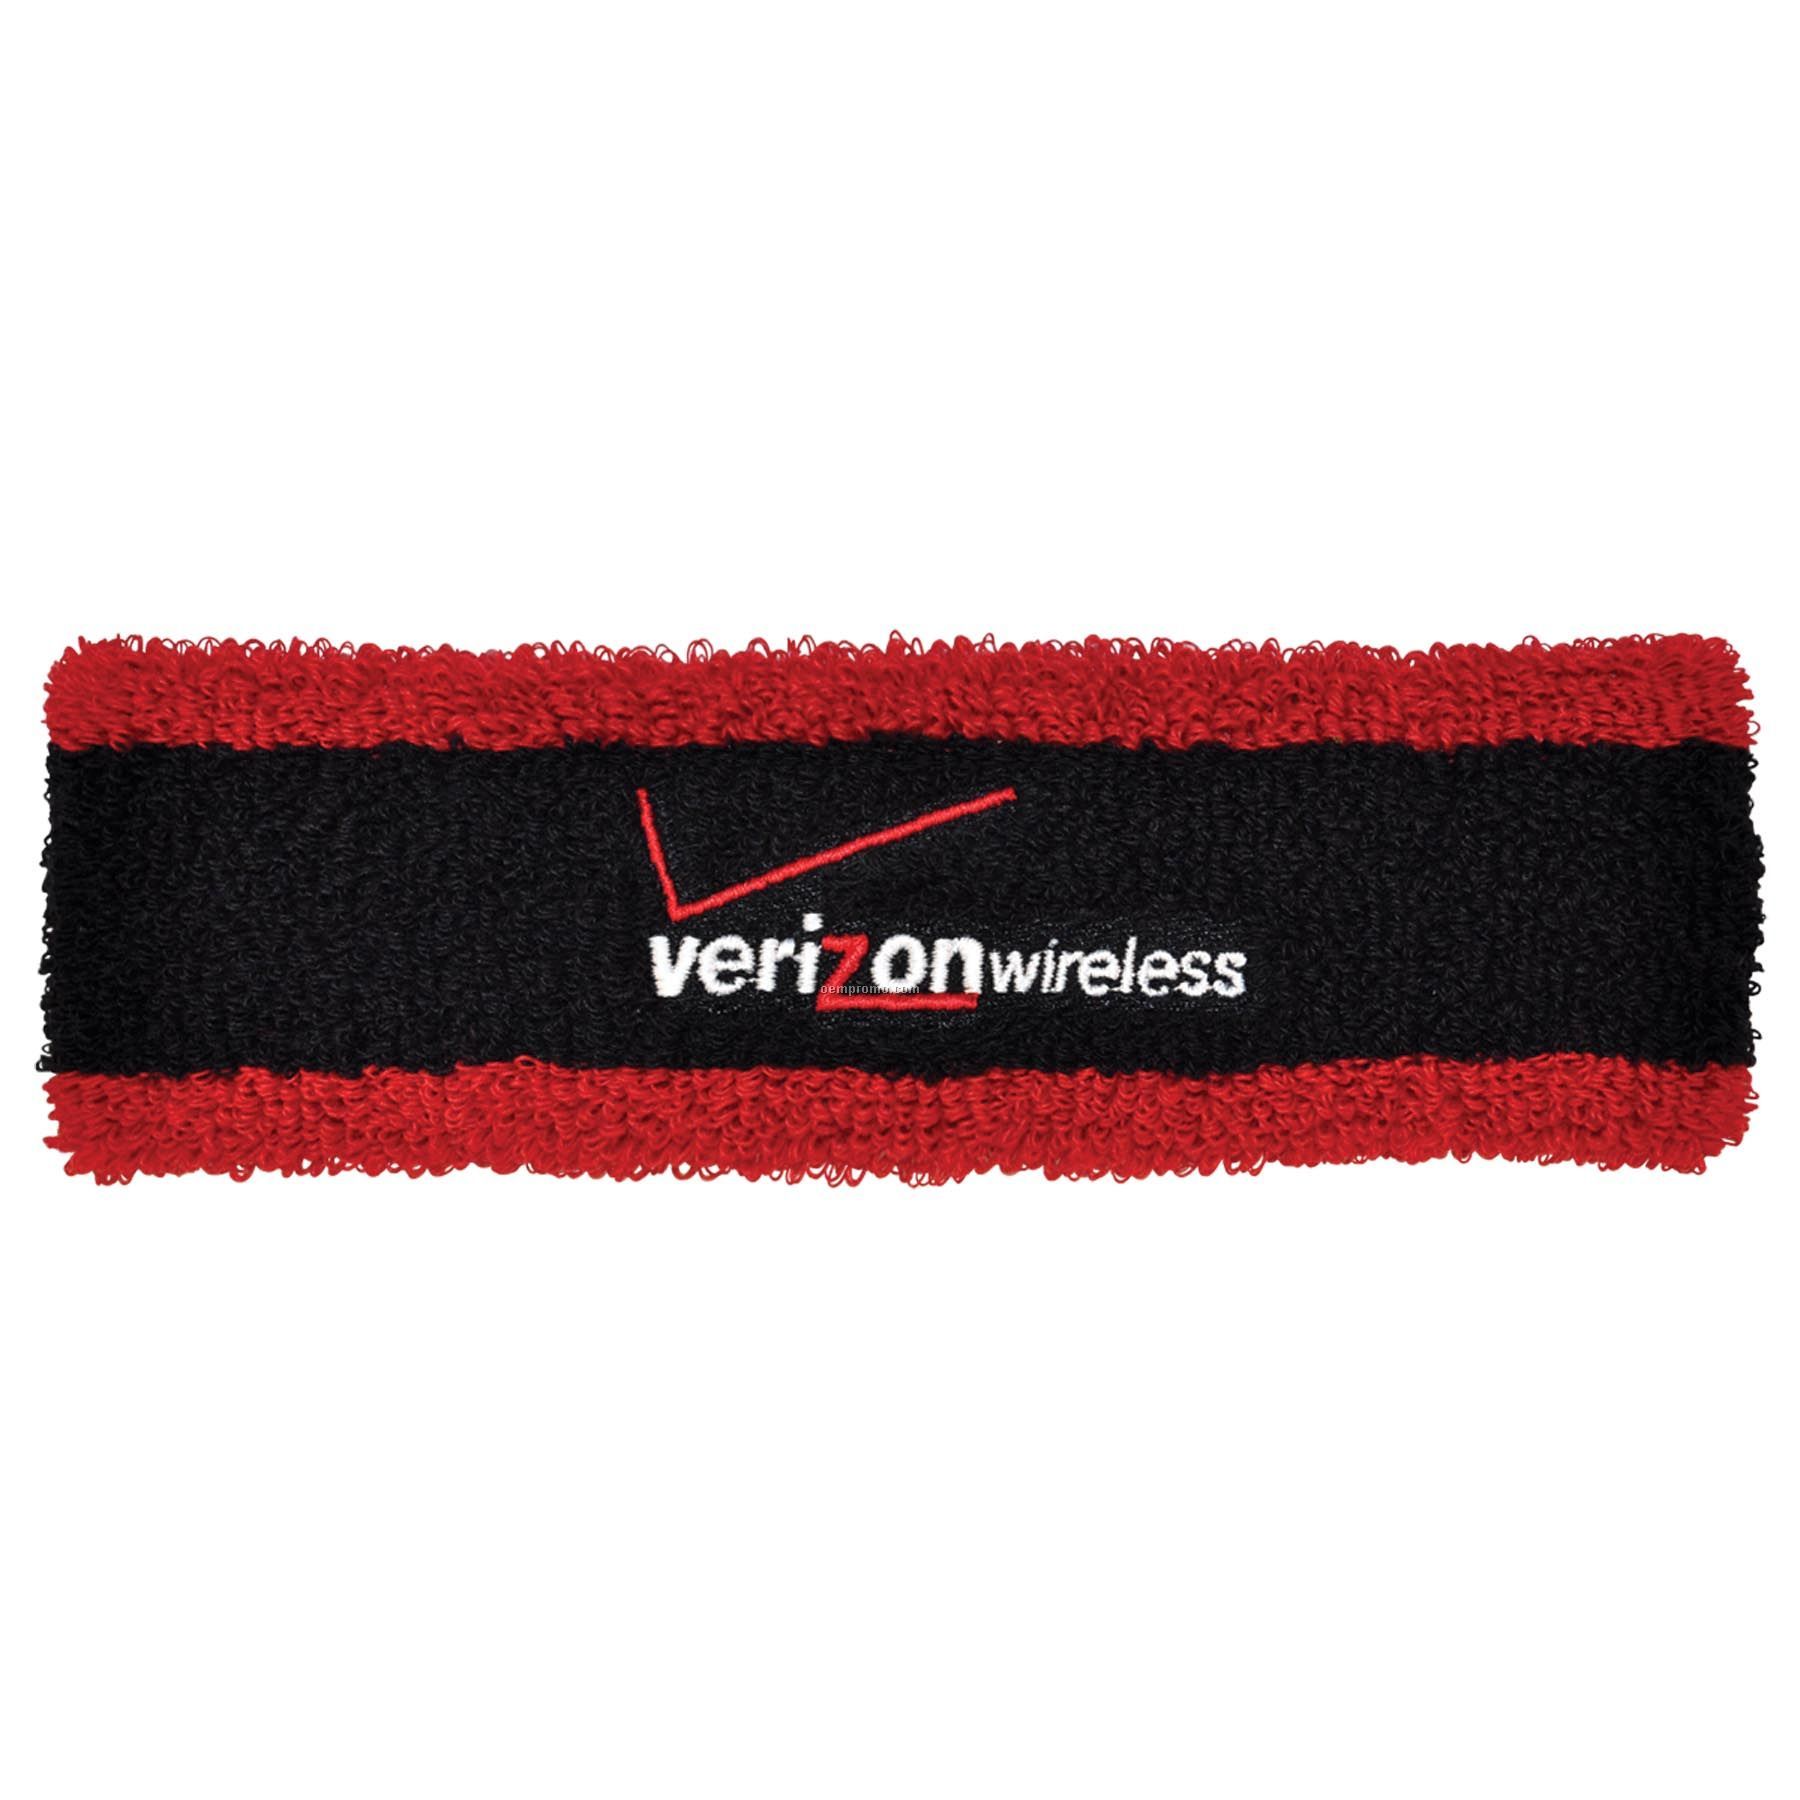 2" High 2-ply Heavyweight Striped Headband With Embroidery Up To 7500 St.